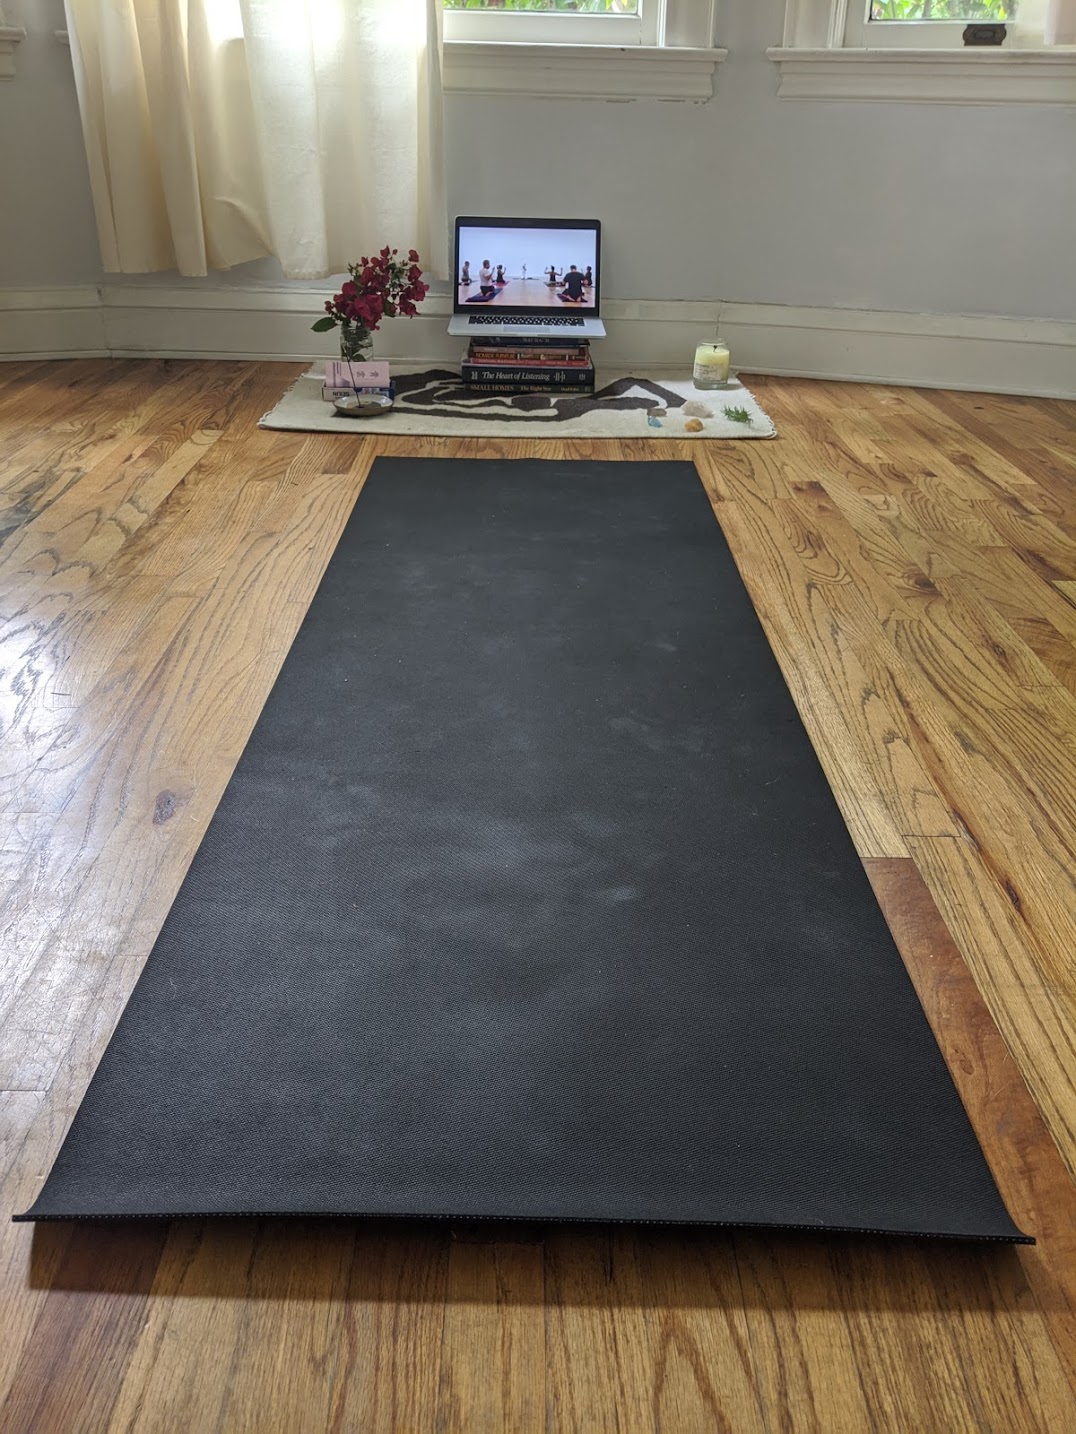 Yoga Mat in front of a Computer Shrine